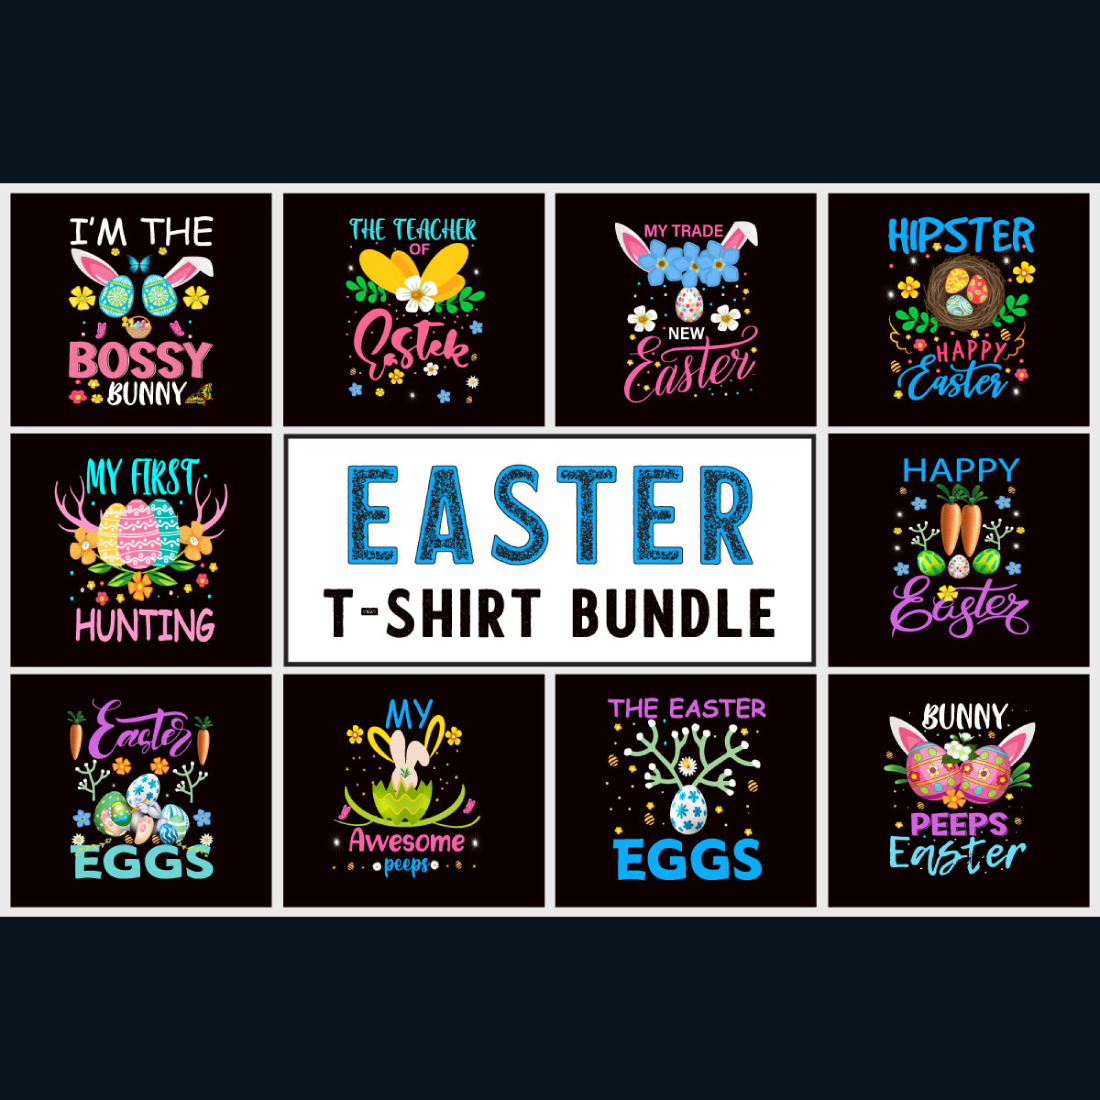 Collection of colorful images on Easter theme.